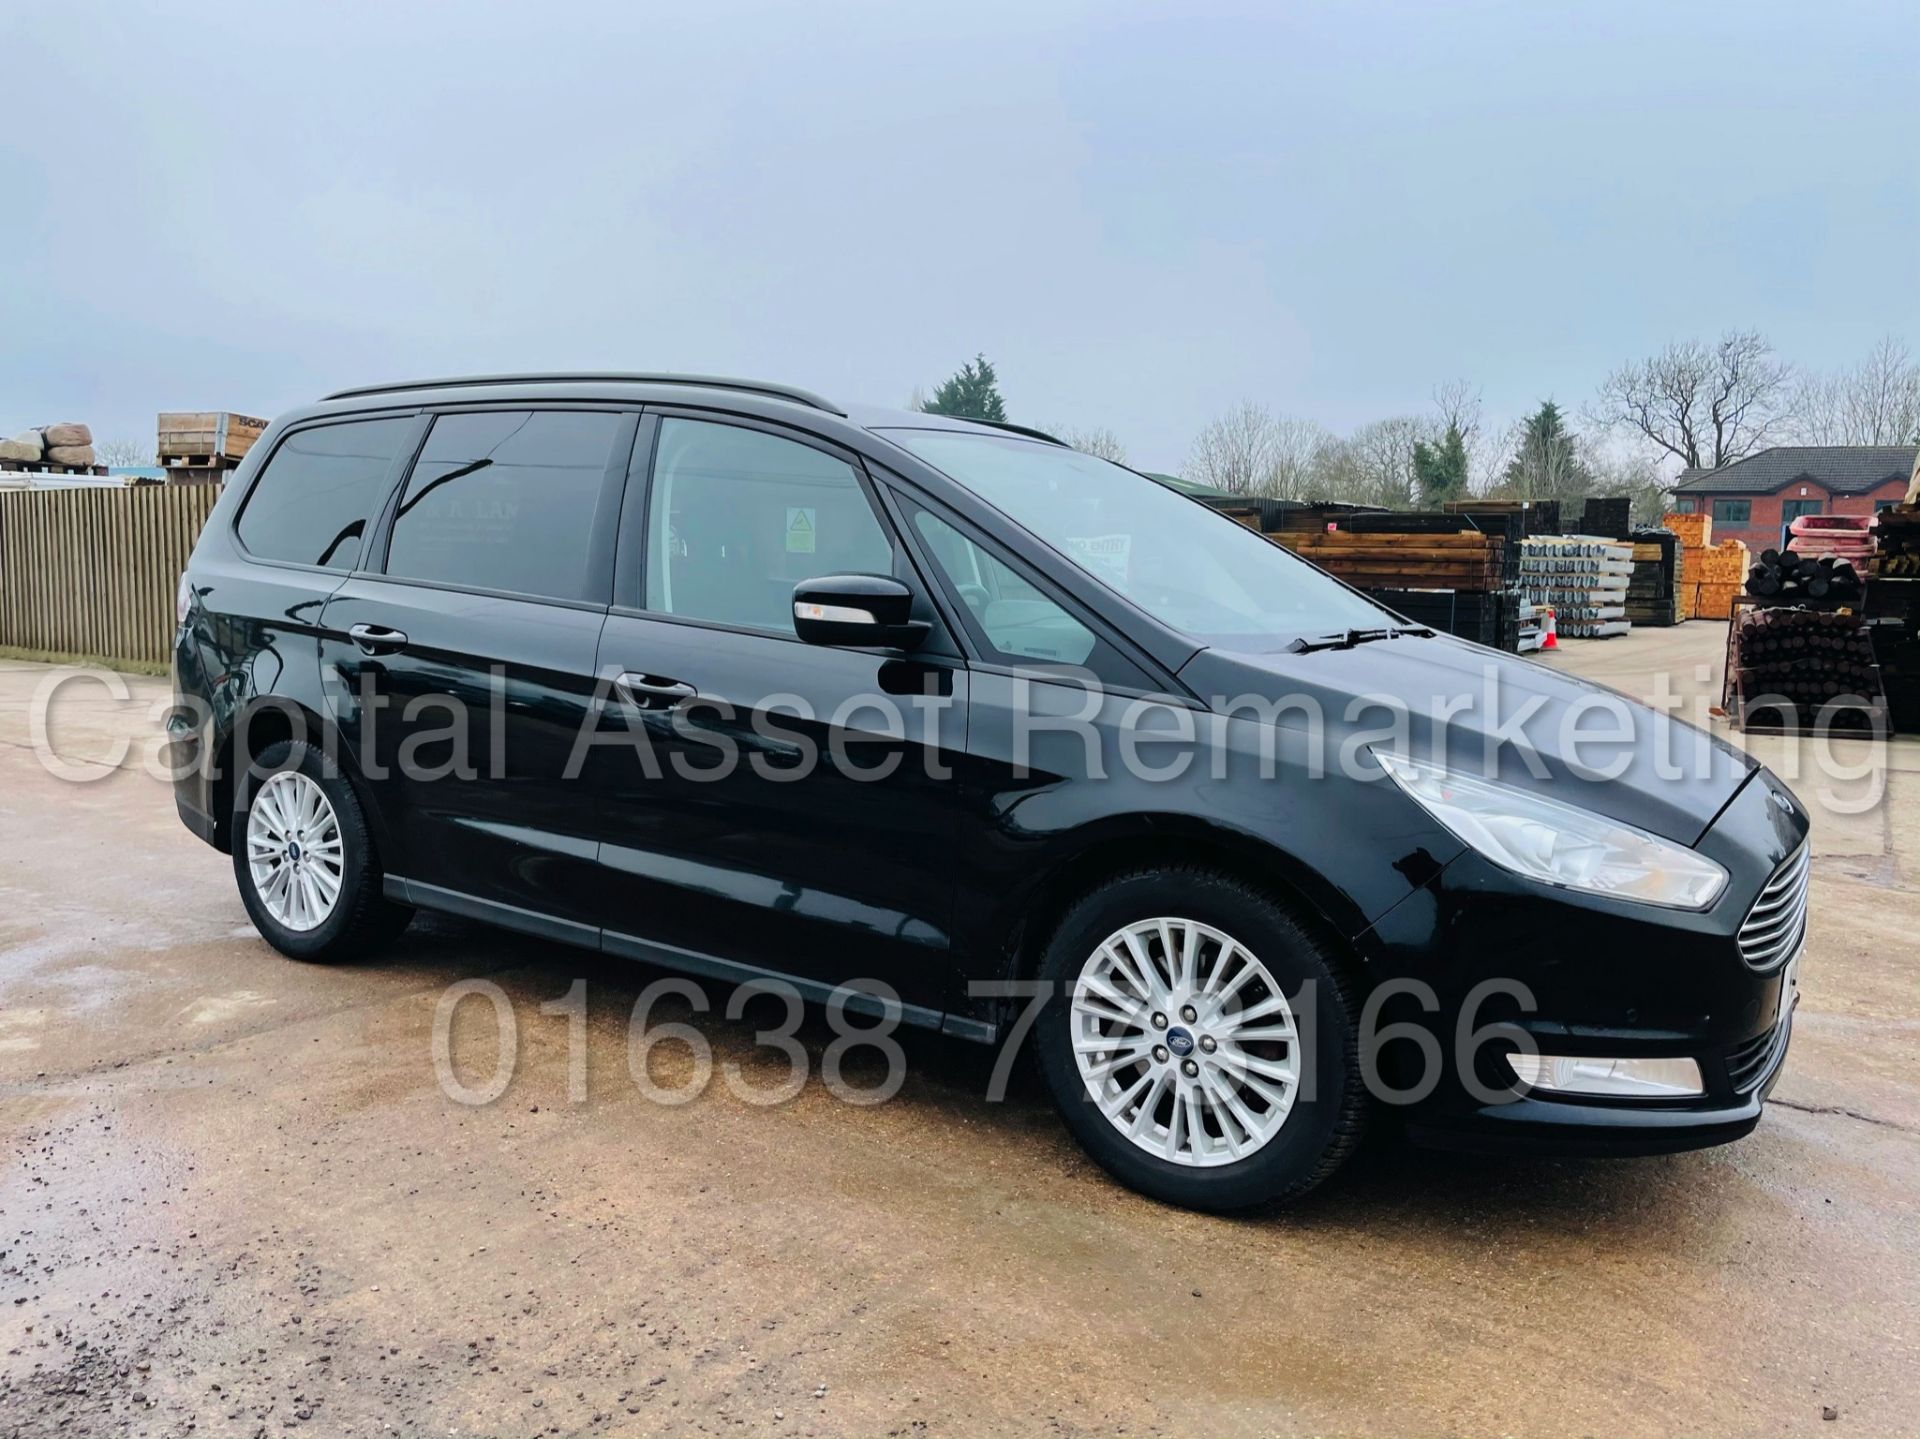 (On Sale) FORD GALAXY *ZETEC EDITION* 7 SEATER MPV (2017 - EURO 6) '2.0 TDCI - AUTO' (1 OWNER)